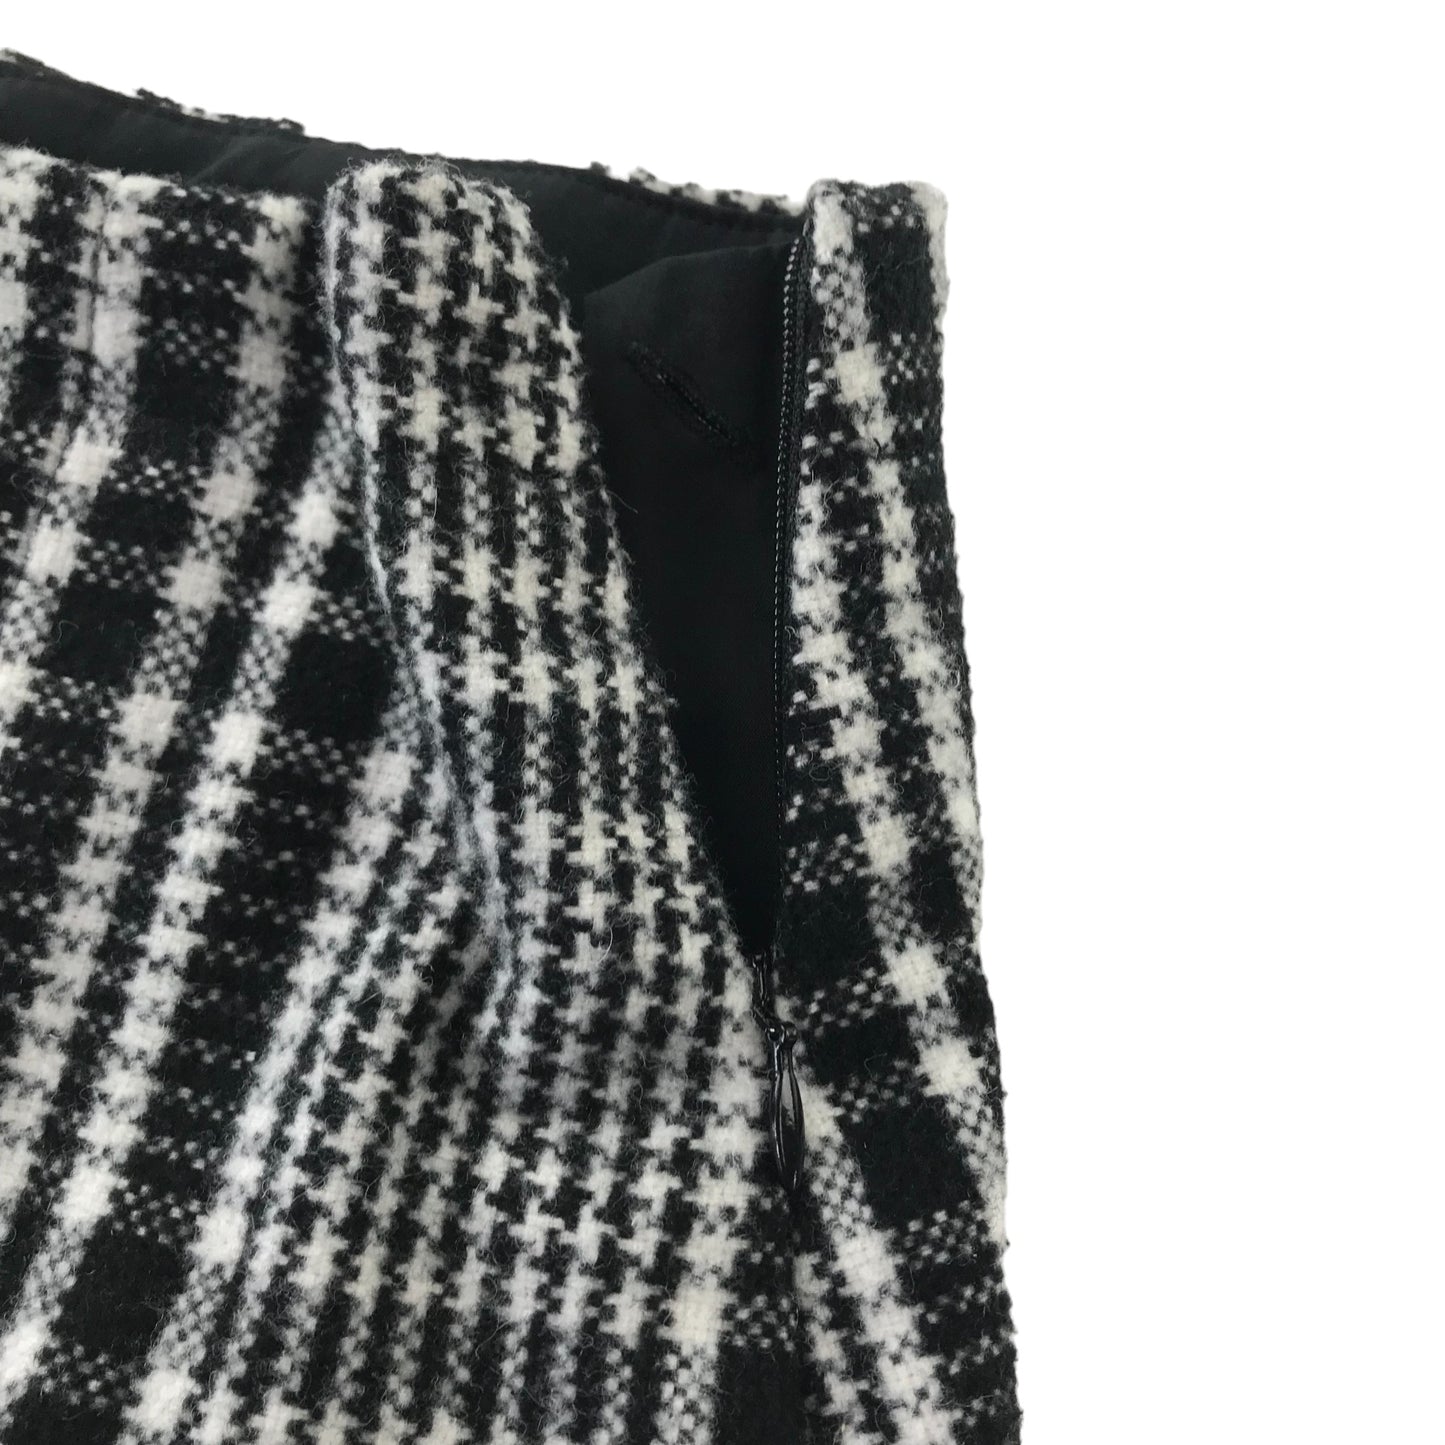 Next Skirt Age 12 Black and White Pleated Checked Houndstooth